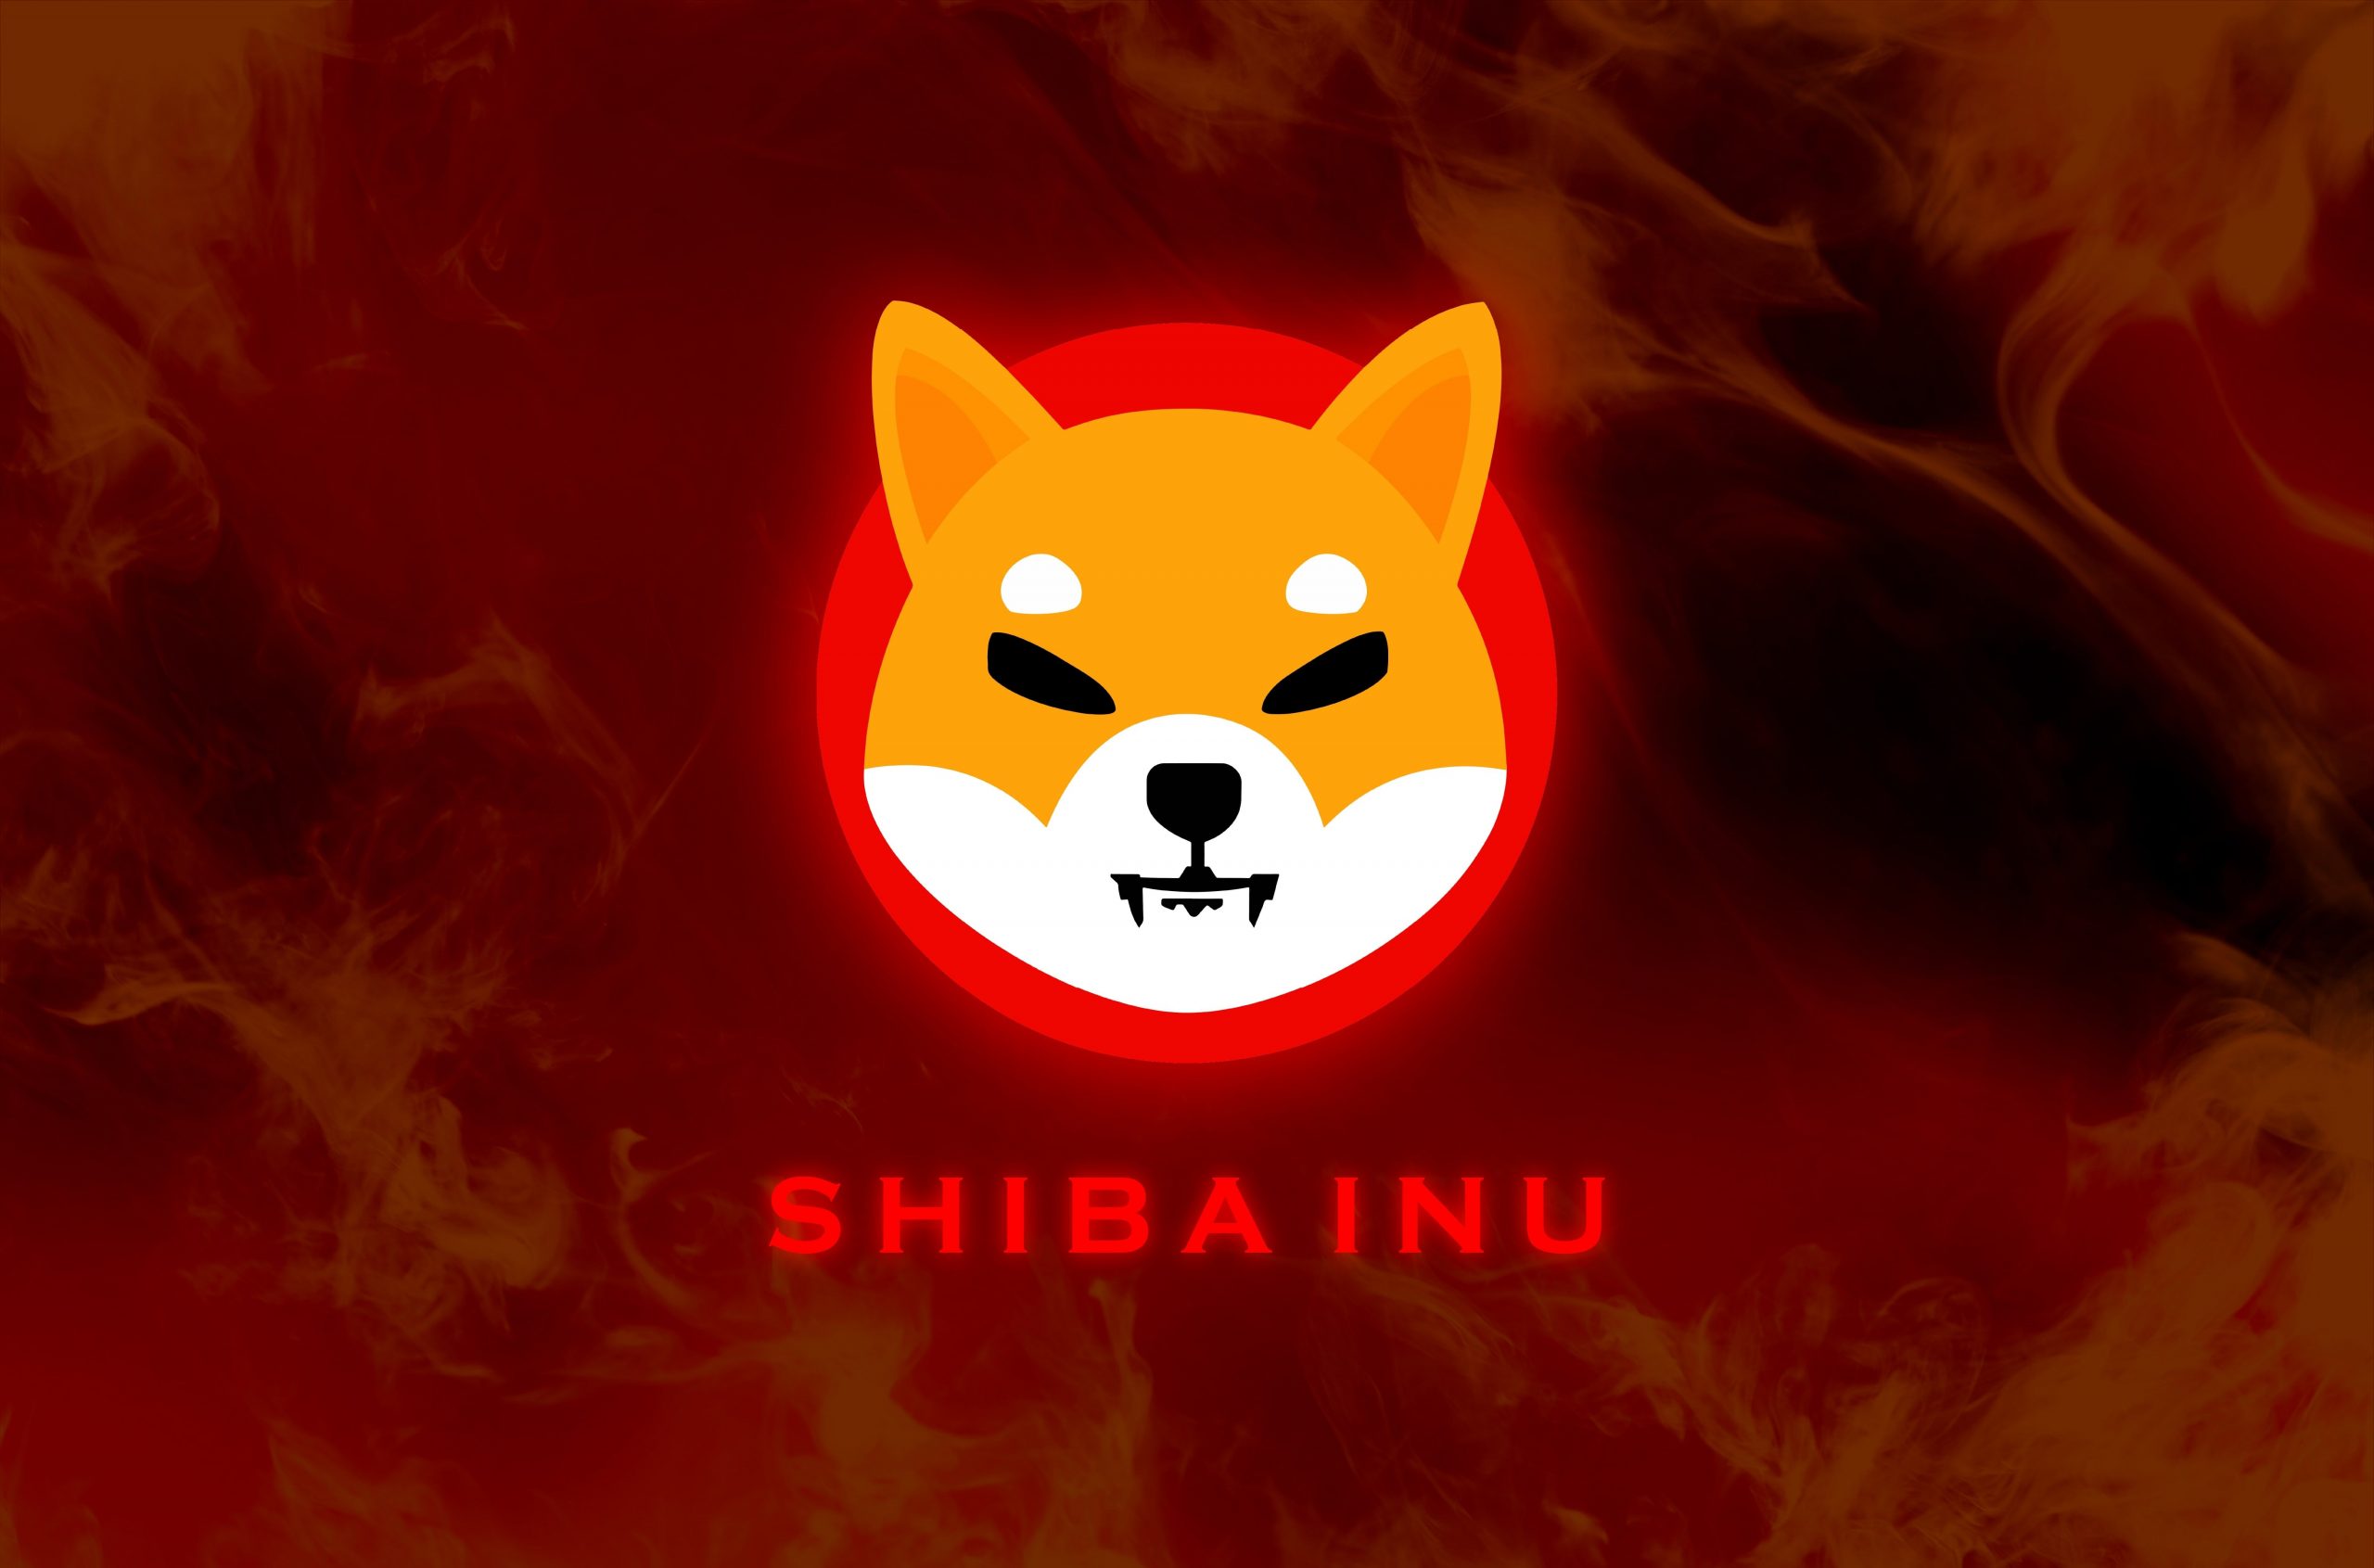 Shiba Inu Community Move to Boost SHIB Price After a Fall Below the $0.00001 Mark